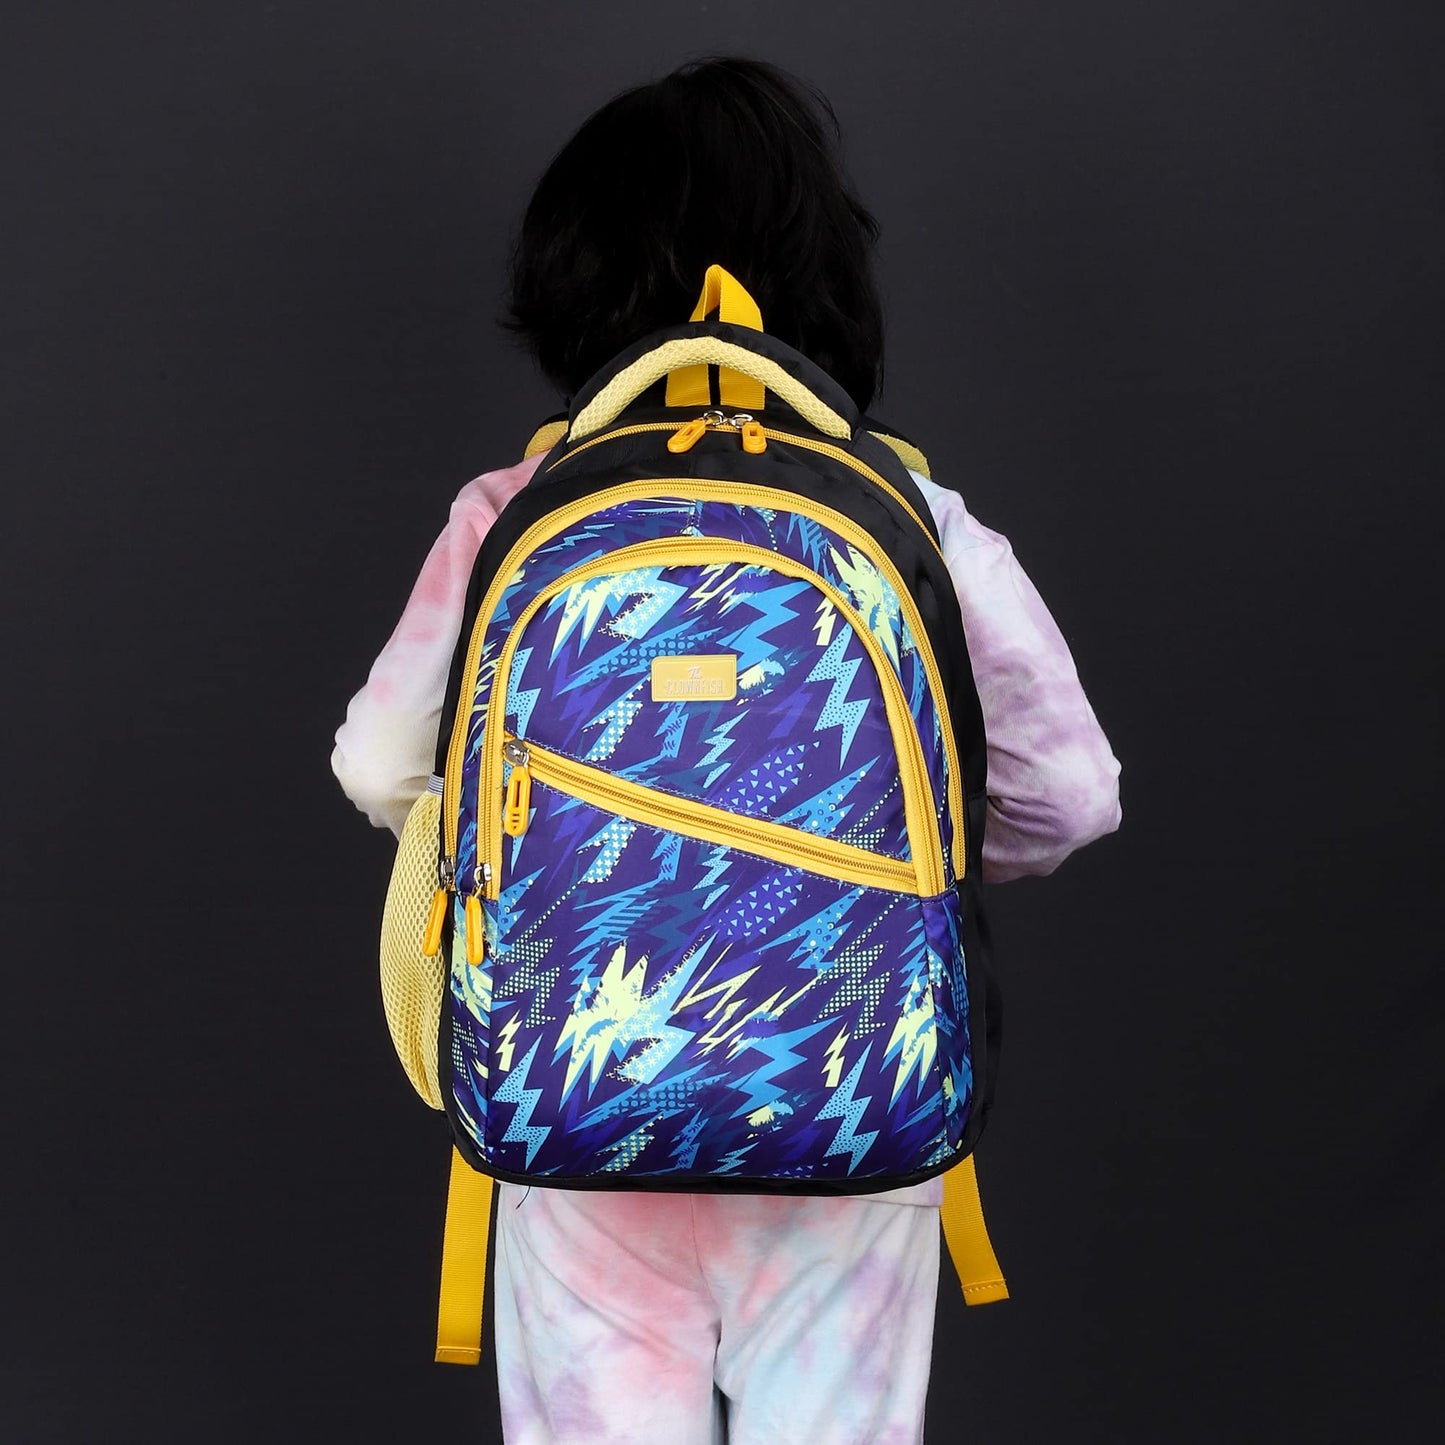 THE CLOWNFISH Brainbox Series Printed Polyester 30 L School Backpack With Pencil/Front Cross Zip Pocket Daypack Picnic Bag For School Going Boys & Girls Age 8-10 Years (Light Blue)